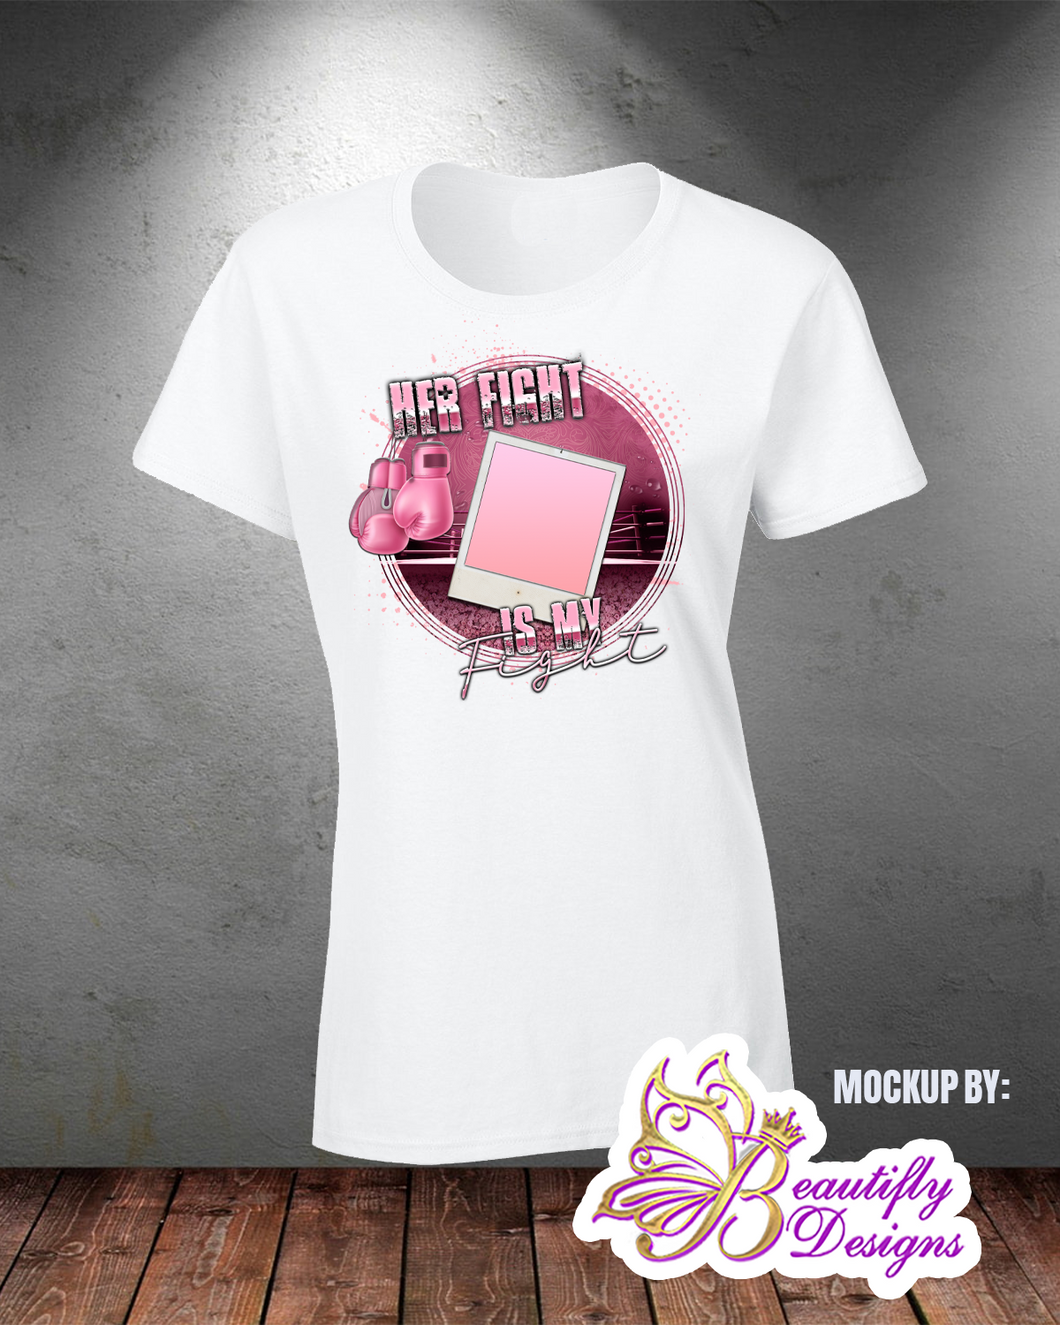 Her Fight Is My Fight- Breast Cancer Shirt